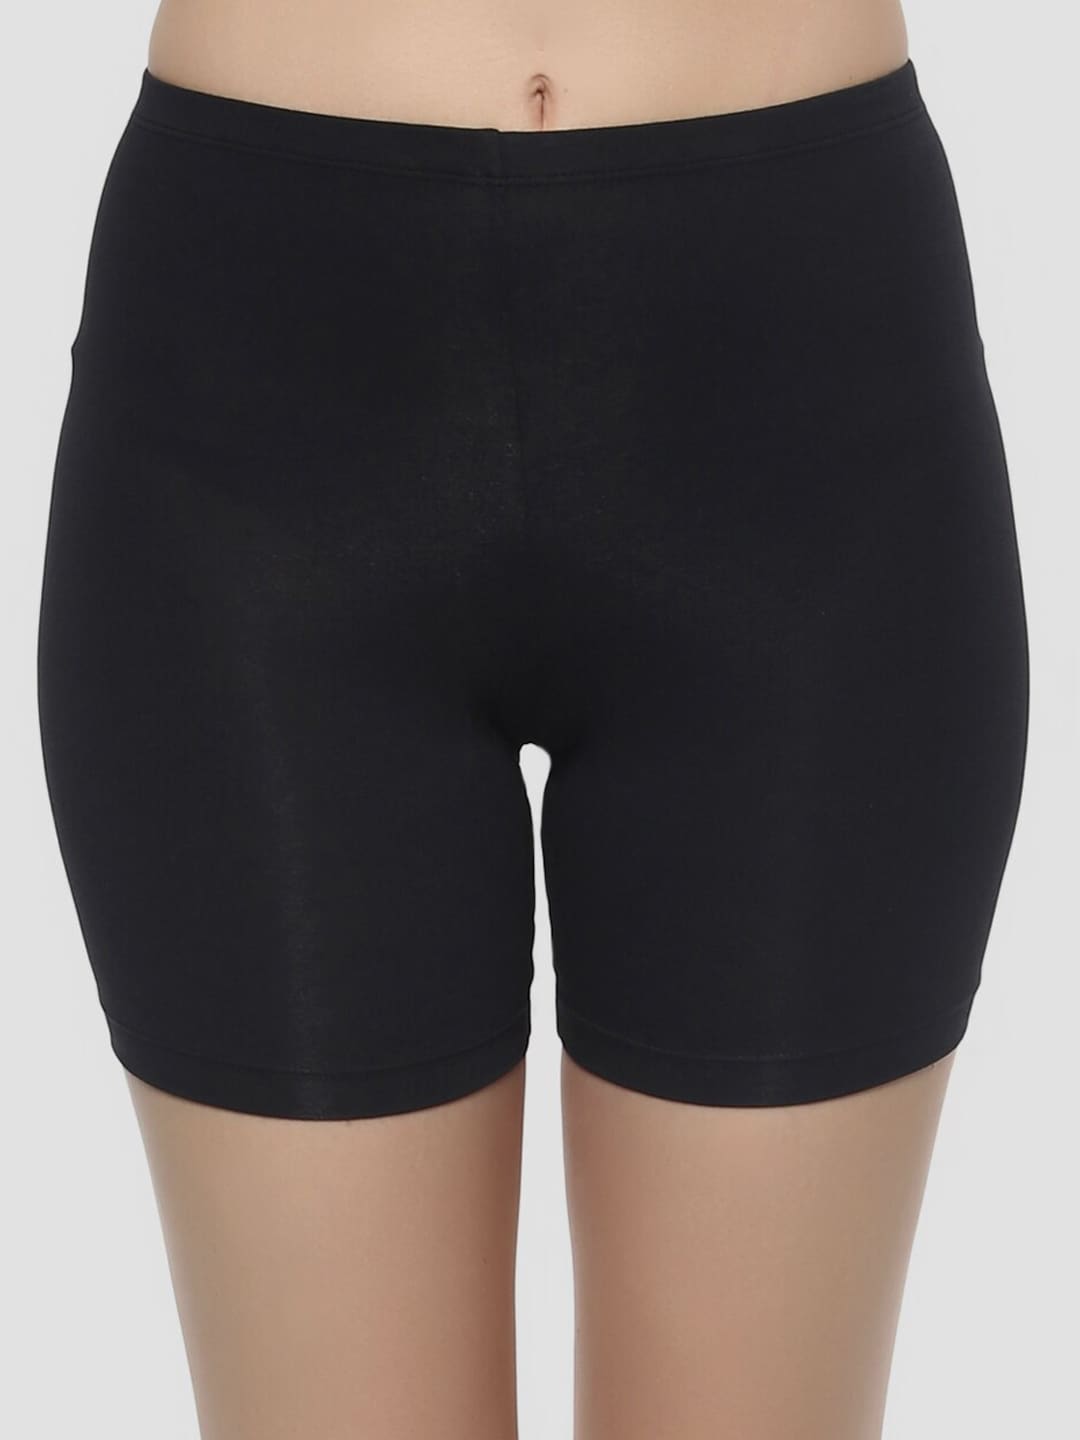 Soie Women Black Solid Cycling Shorts CS-1 Price in India